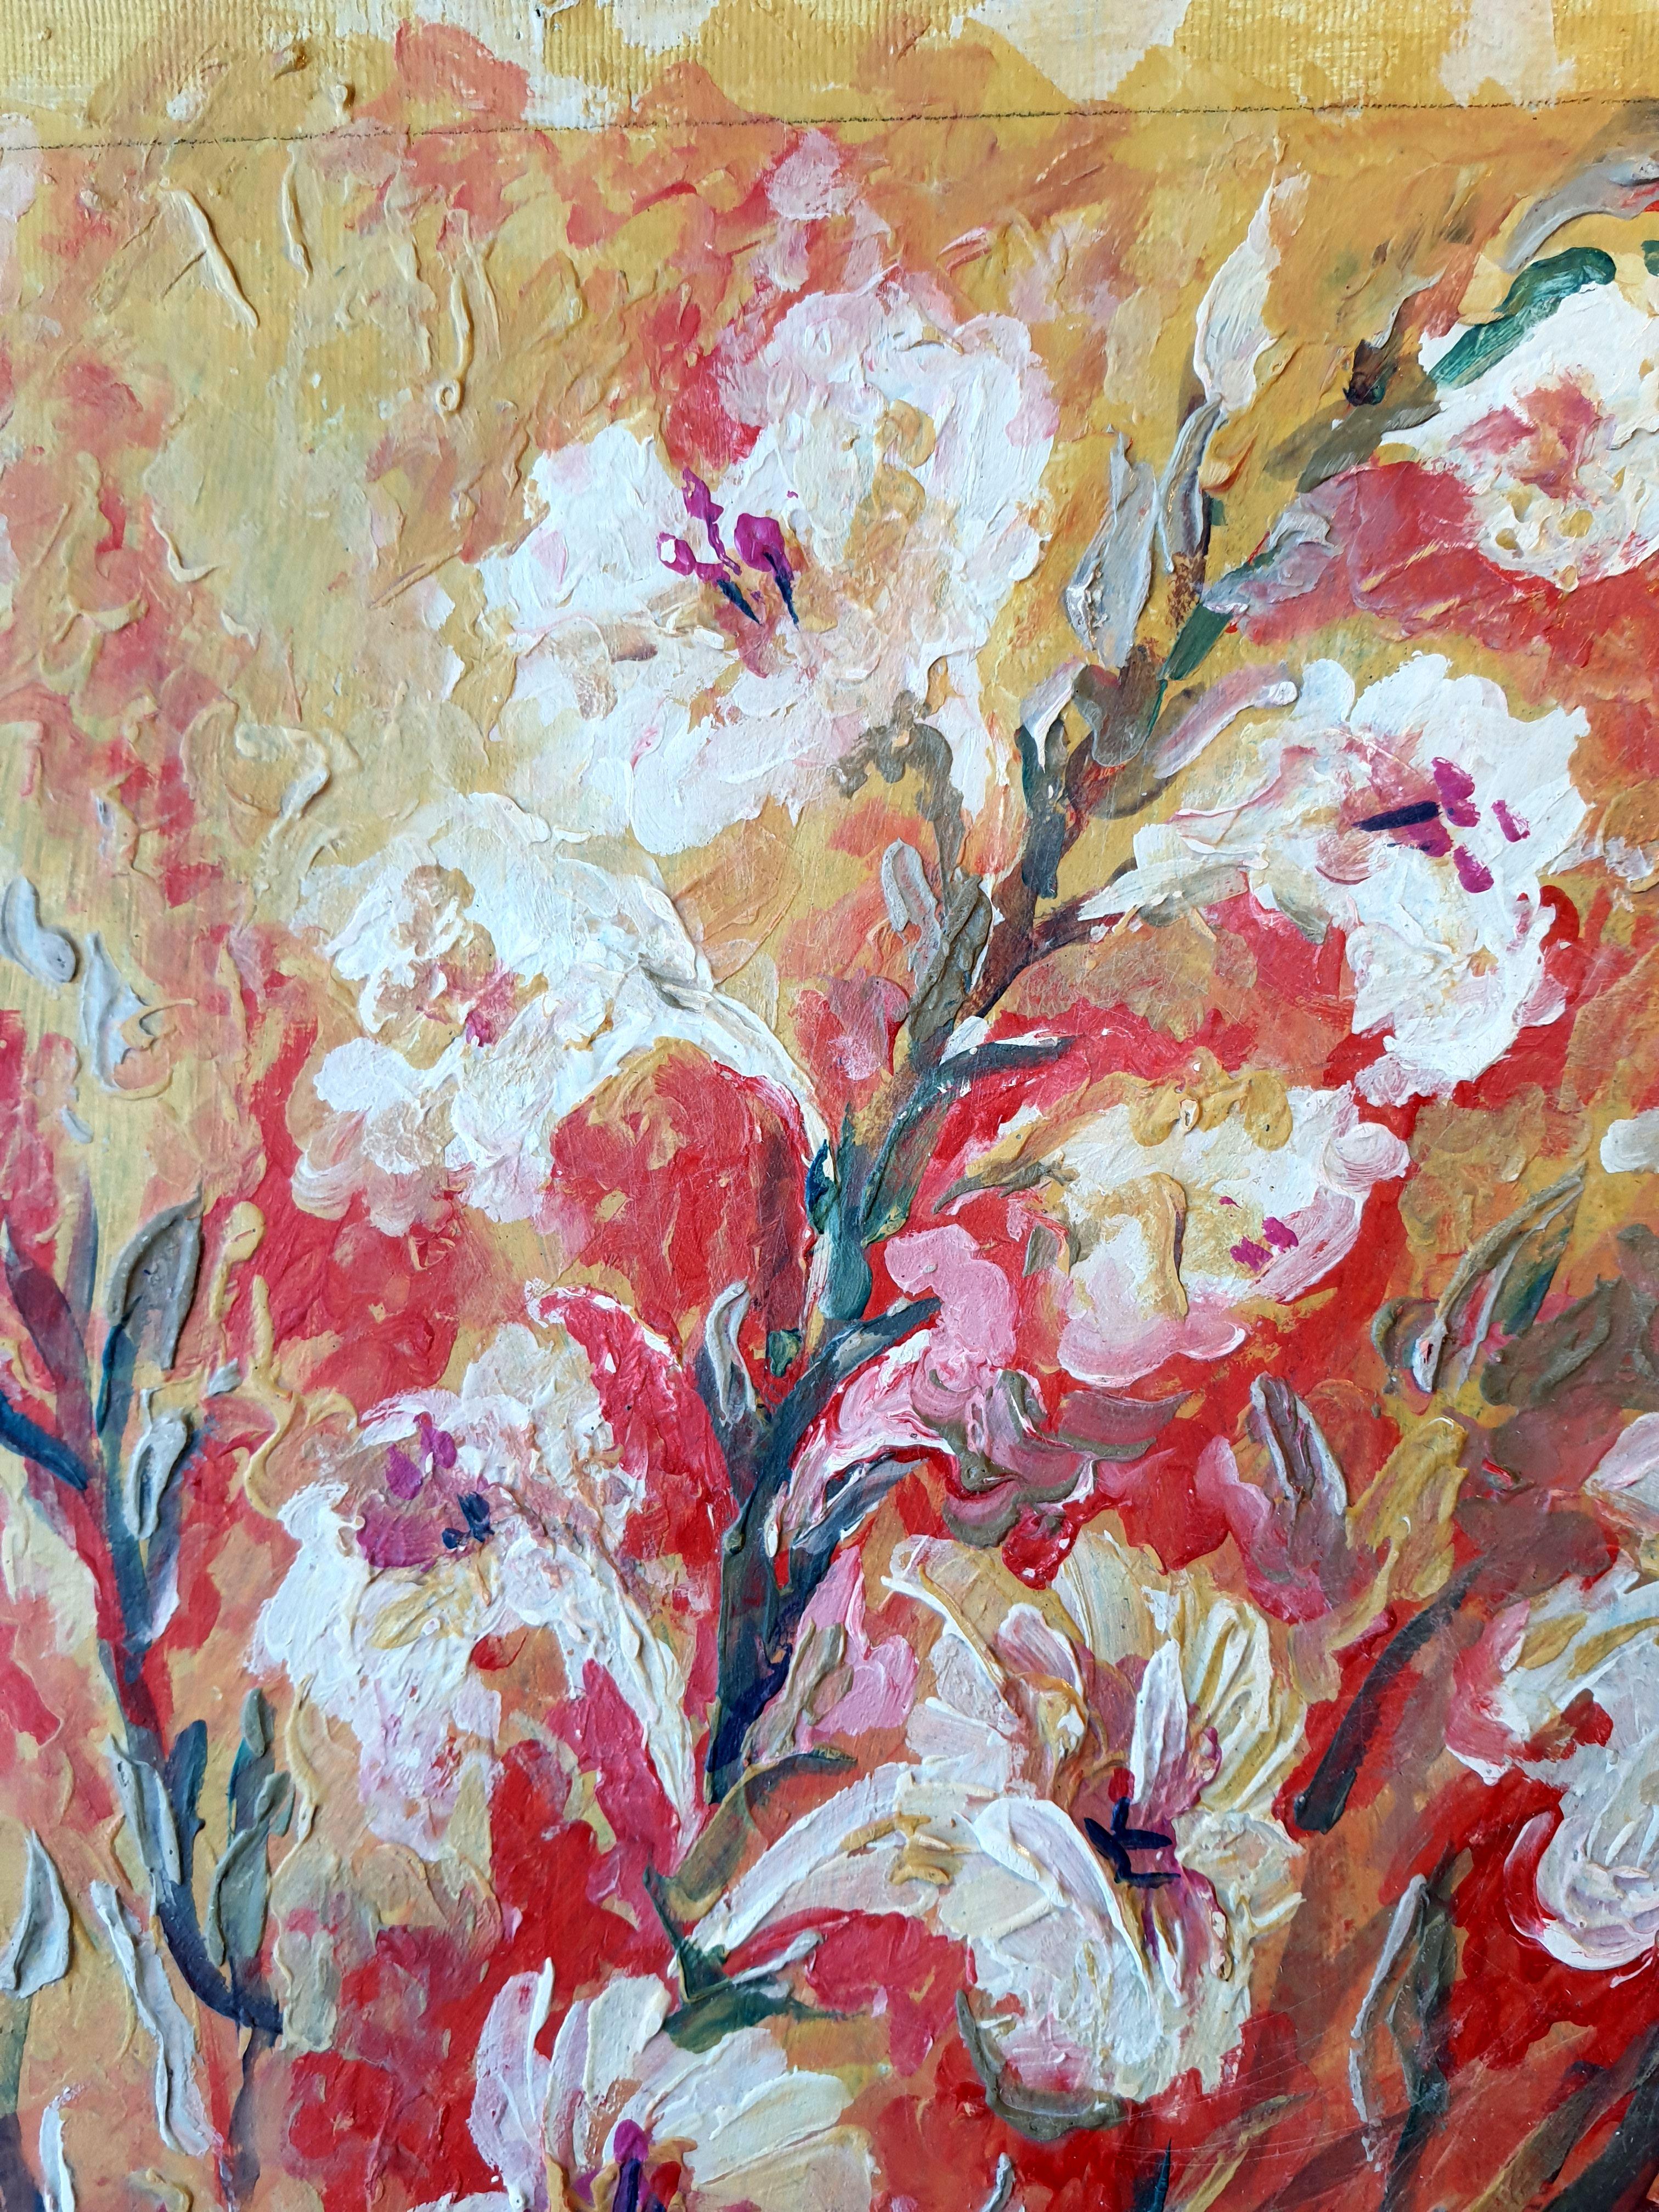 This vibrant canvas is a dance of colors, where I poured my emotions into every brushstroke. The fervent reds and soothing whites collide and mingle in an expressionist celebration, inspired by nature's own masterpieces. With the soft touches of